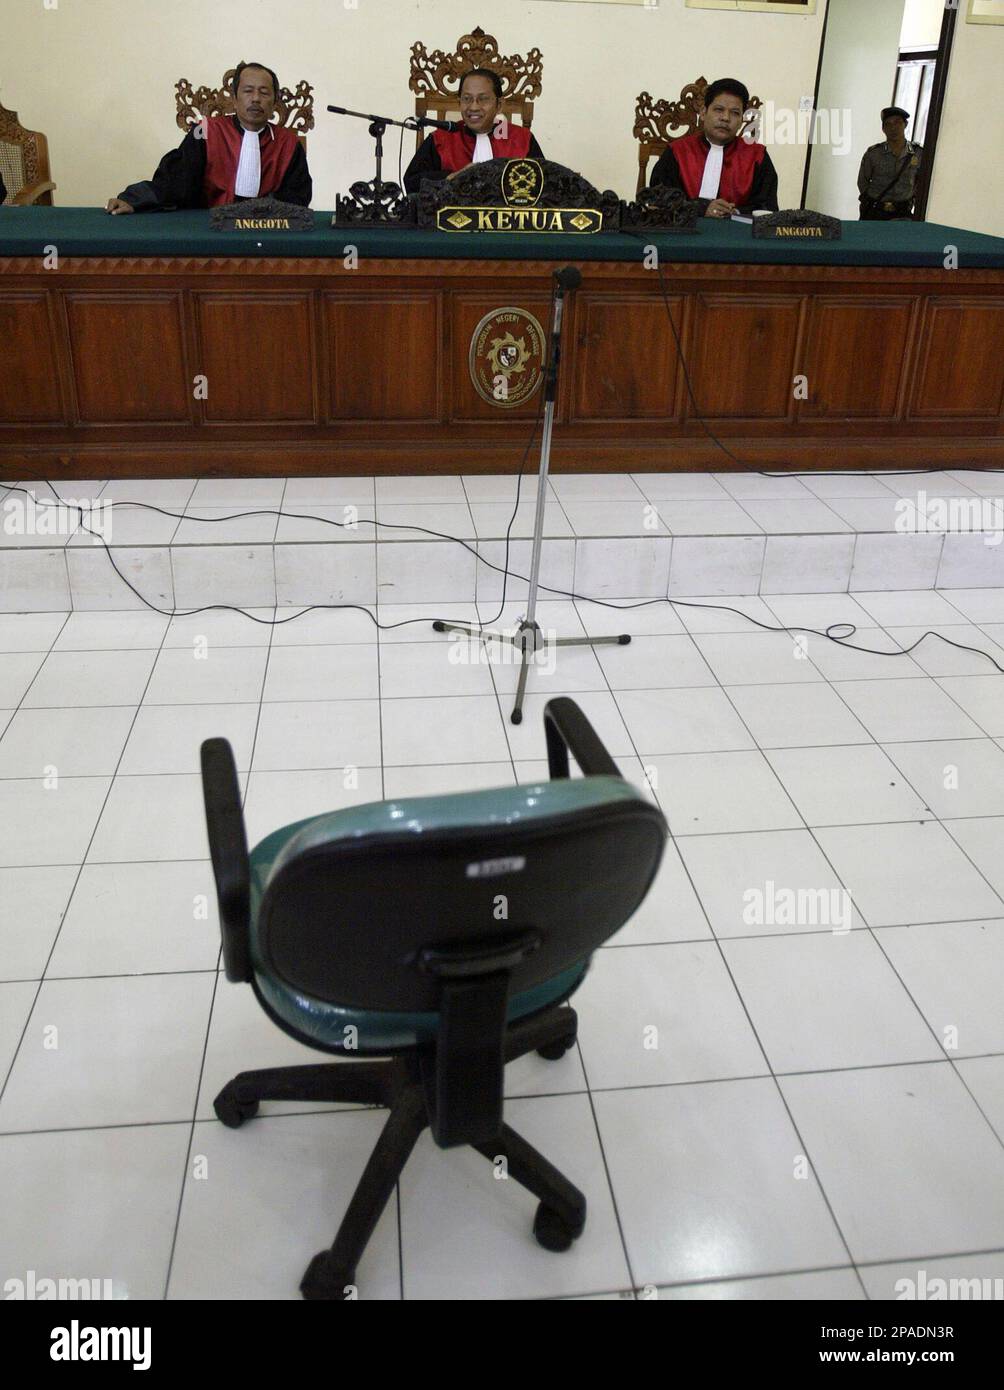 Indonesian judges of Ali Ghufron (alias Mukhlas), from left: Daniel Palittin, Posman Naingolan, and Muhammad Sabir talk to prosecutor and Bali bomber's lawyer during a trial at Denpasar District Court in Bali, Indonesia Thursday, Feb. 28, 2008. Mukhlas with Imam Samudra and Amrozi, was sentenced to death for their part in the 2002 nightclub bombings in Kuta, Bali that killed 202 people and injured more than 300. (AP Photo/Firdia Lisnawati) Stock Photo